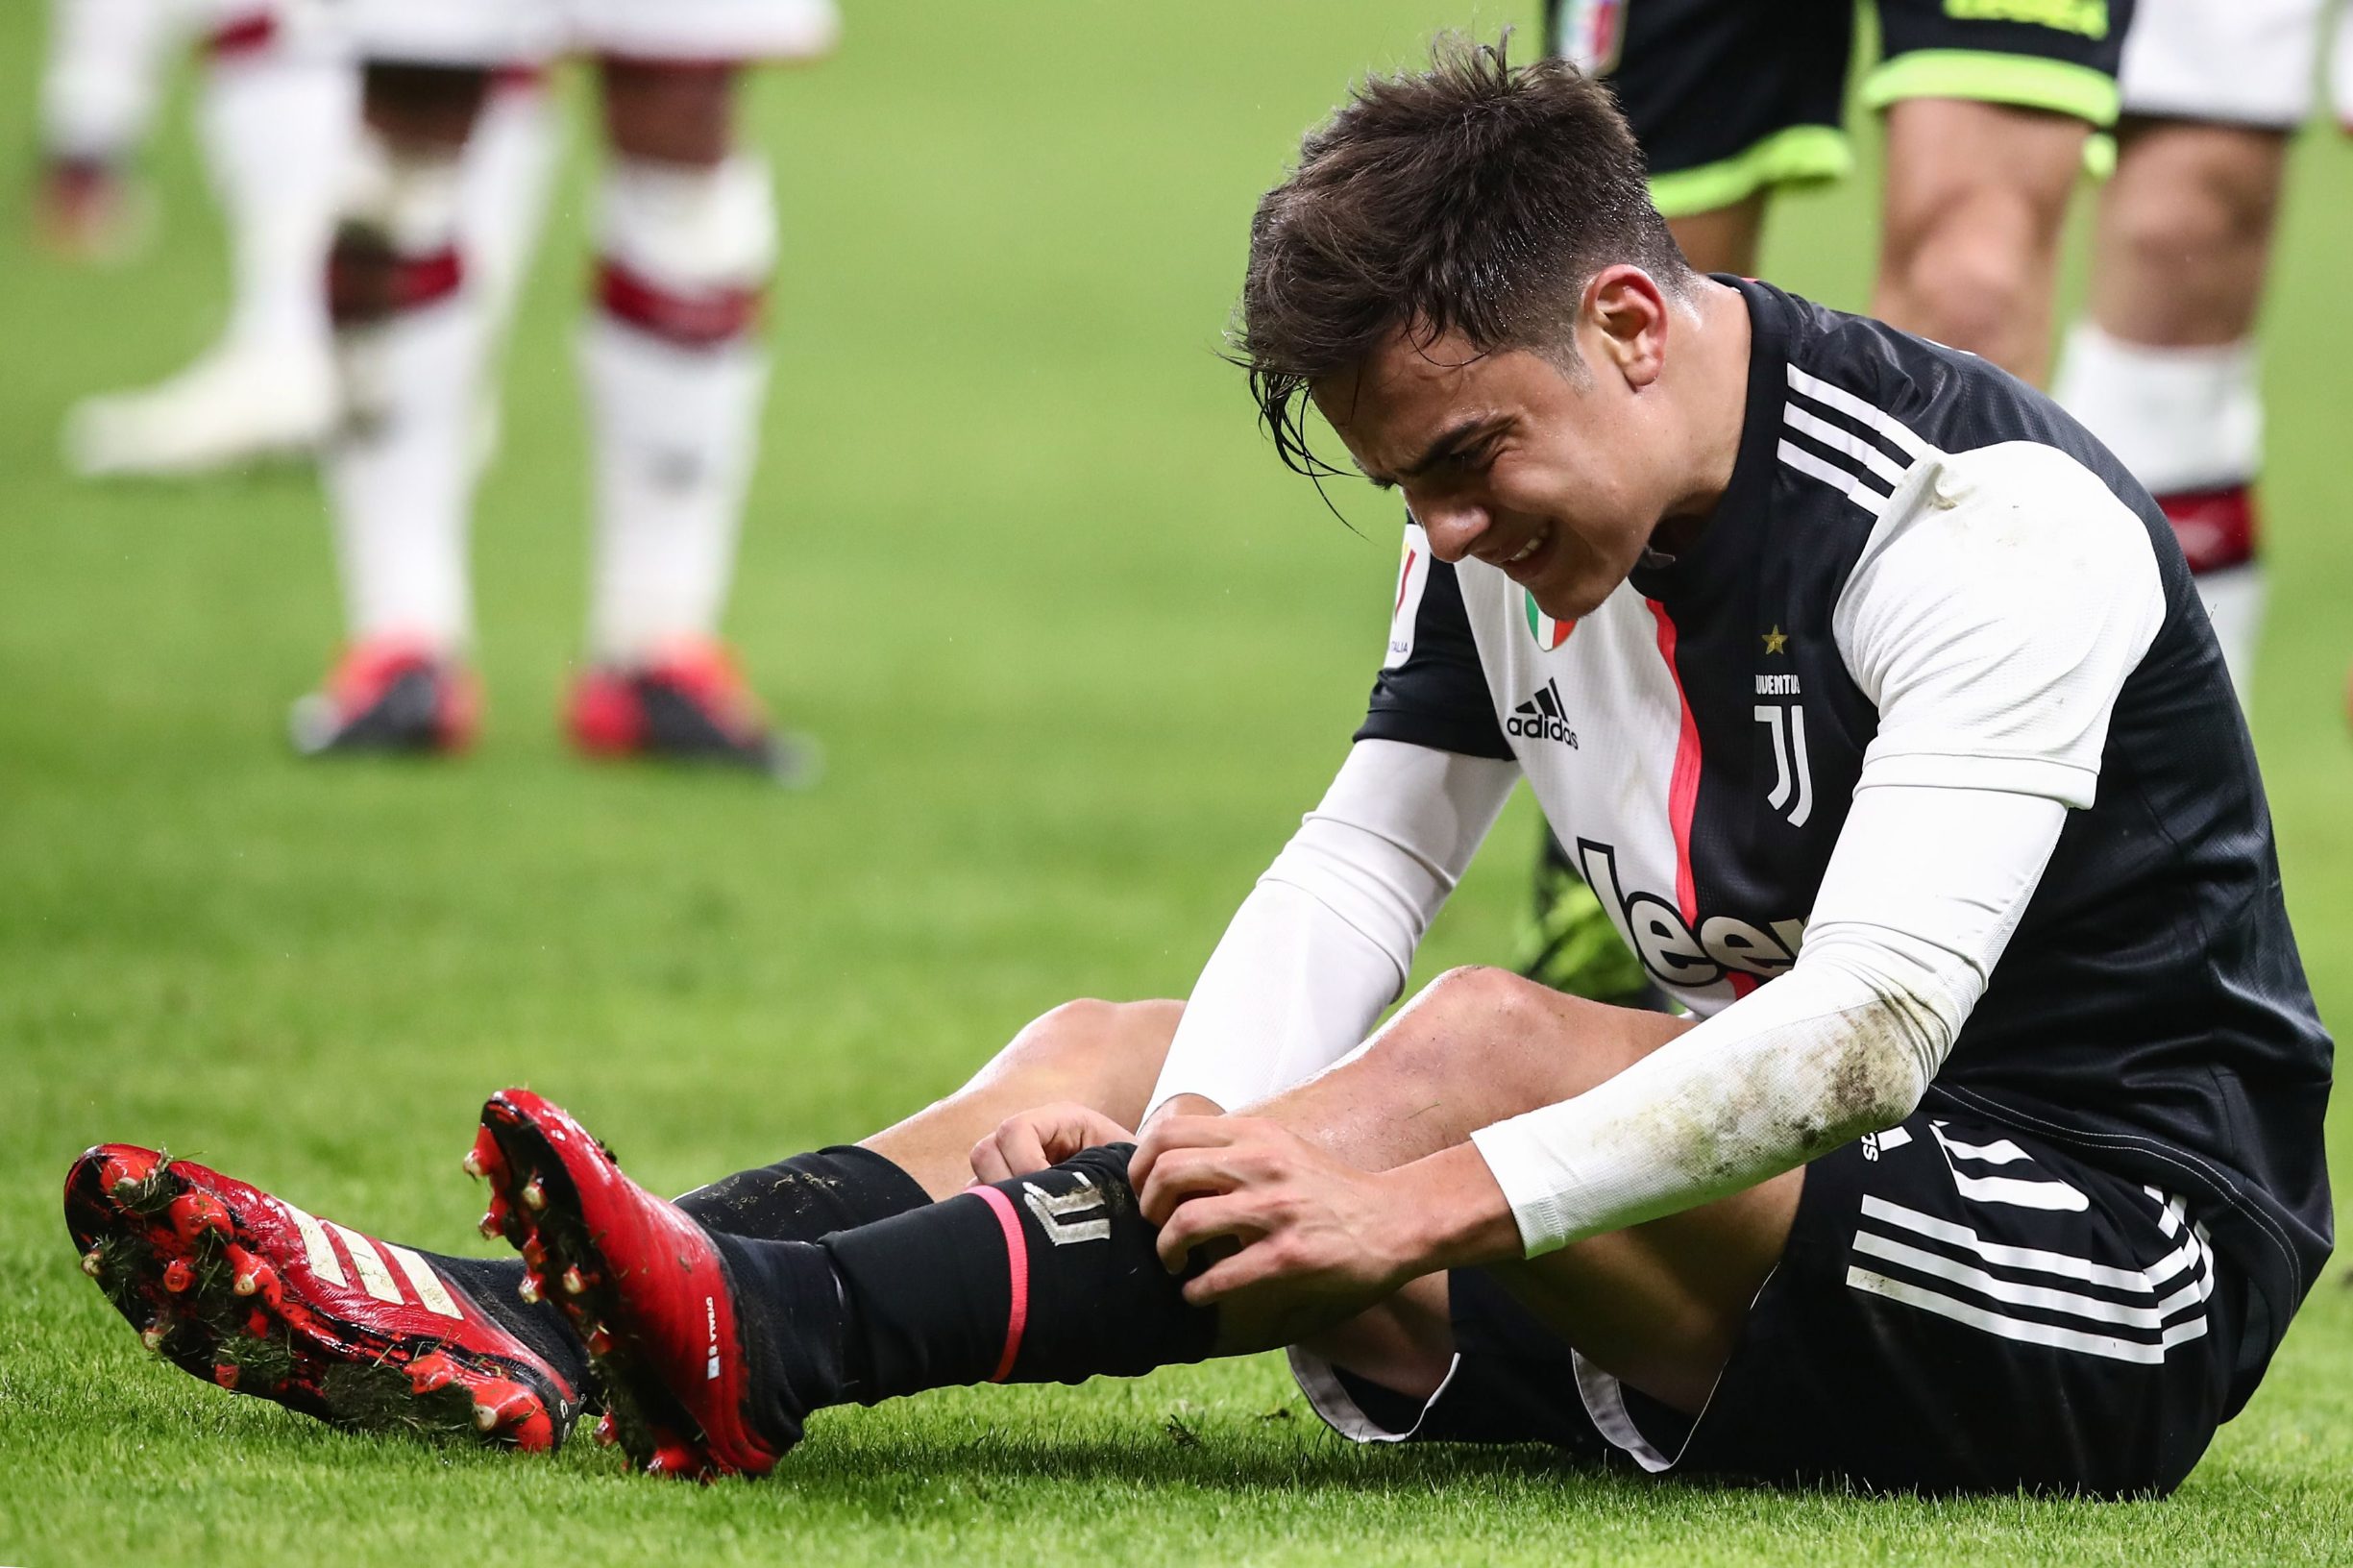 Juventus' Argentine forward Paulo Dybala checks his leg after being tackled during the Italian Cup (Coppa Italia) semi-final first leg football match AC Milan vs Juventus Turin on February 13, 2020 at the San Siro stadium in Milan. (Photo by Isabella BONOTTO / AFP)